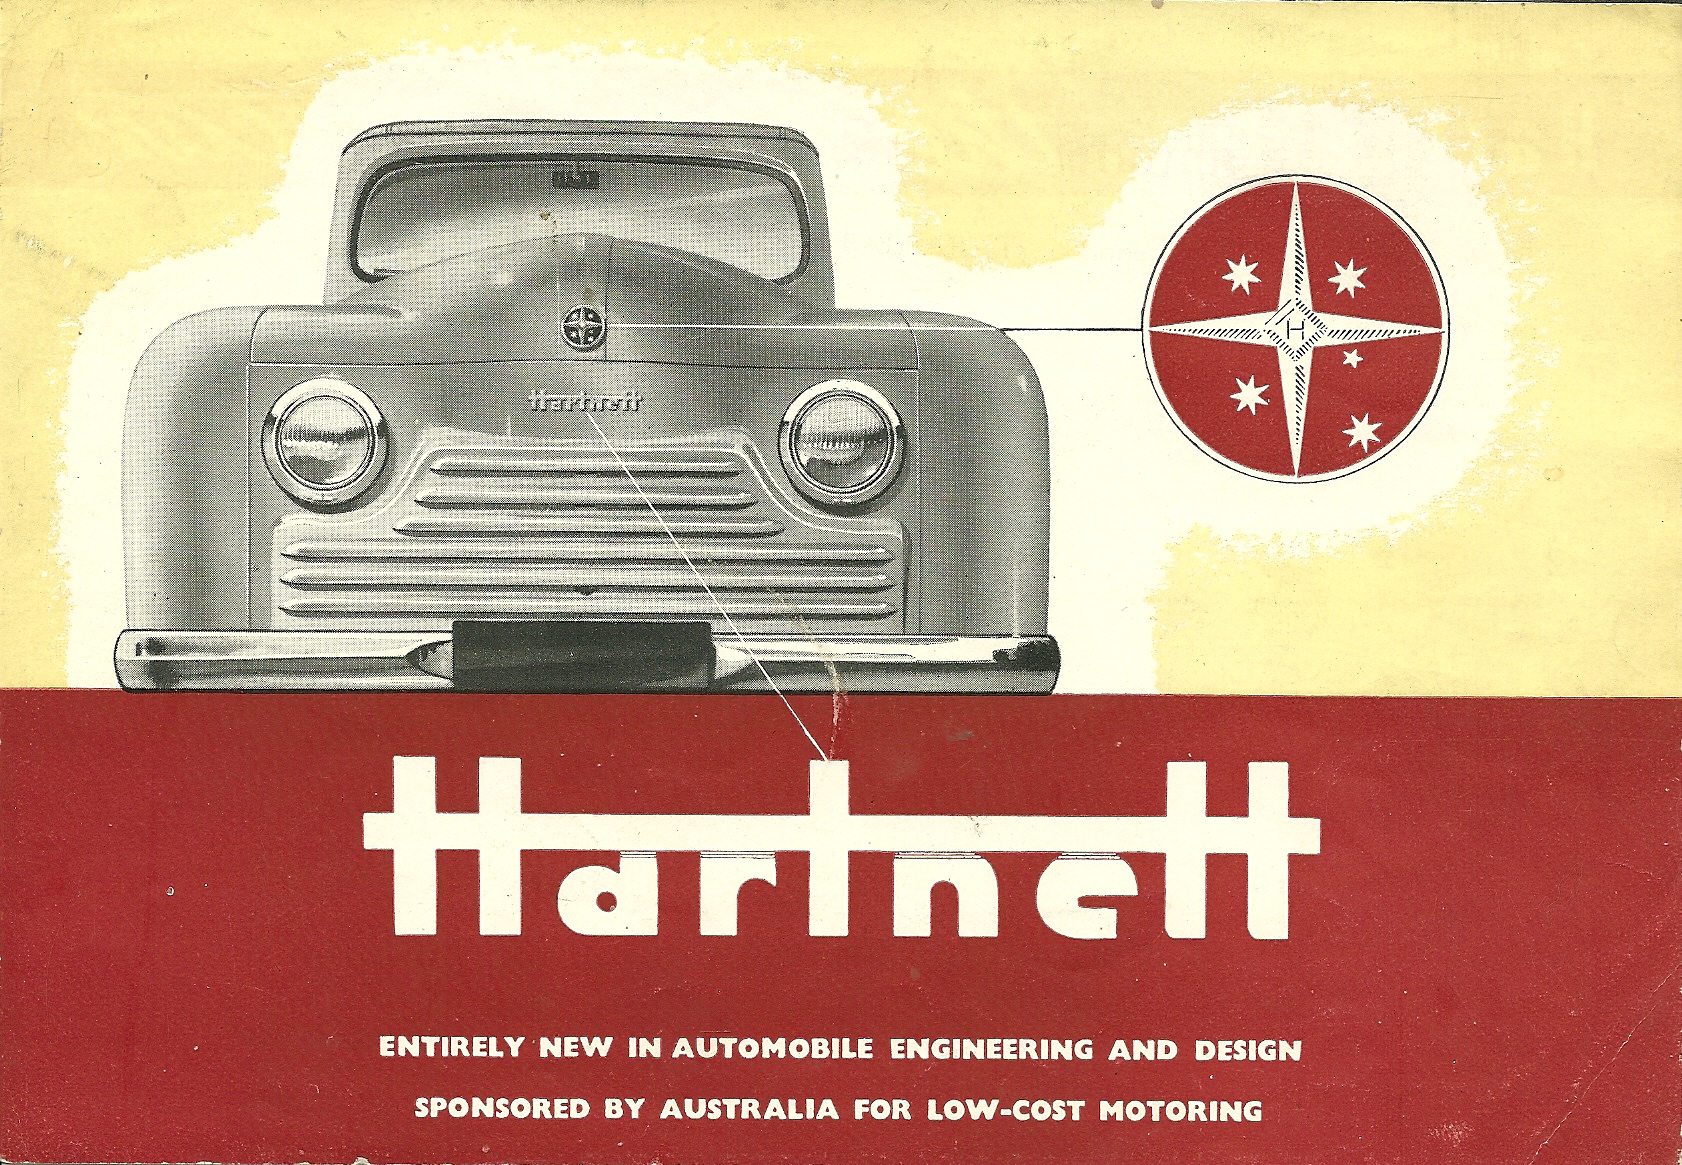 an old advert from a truck manufacturer shows a po of a car in white on a red background